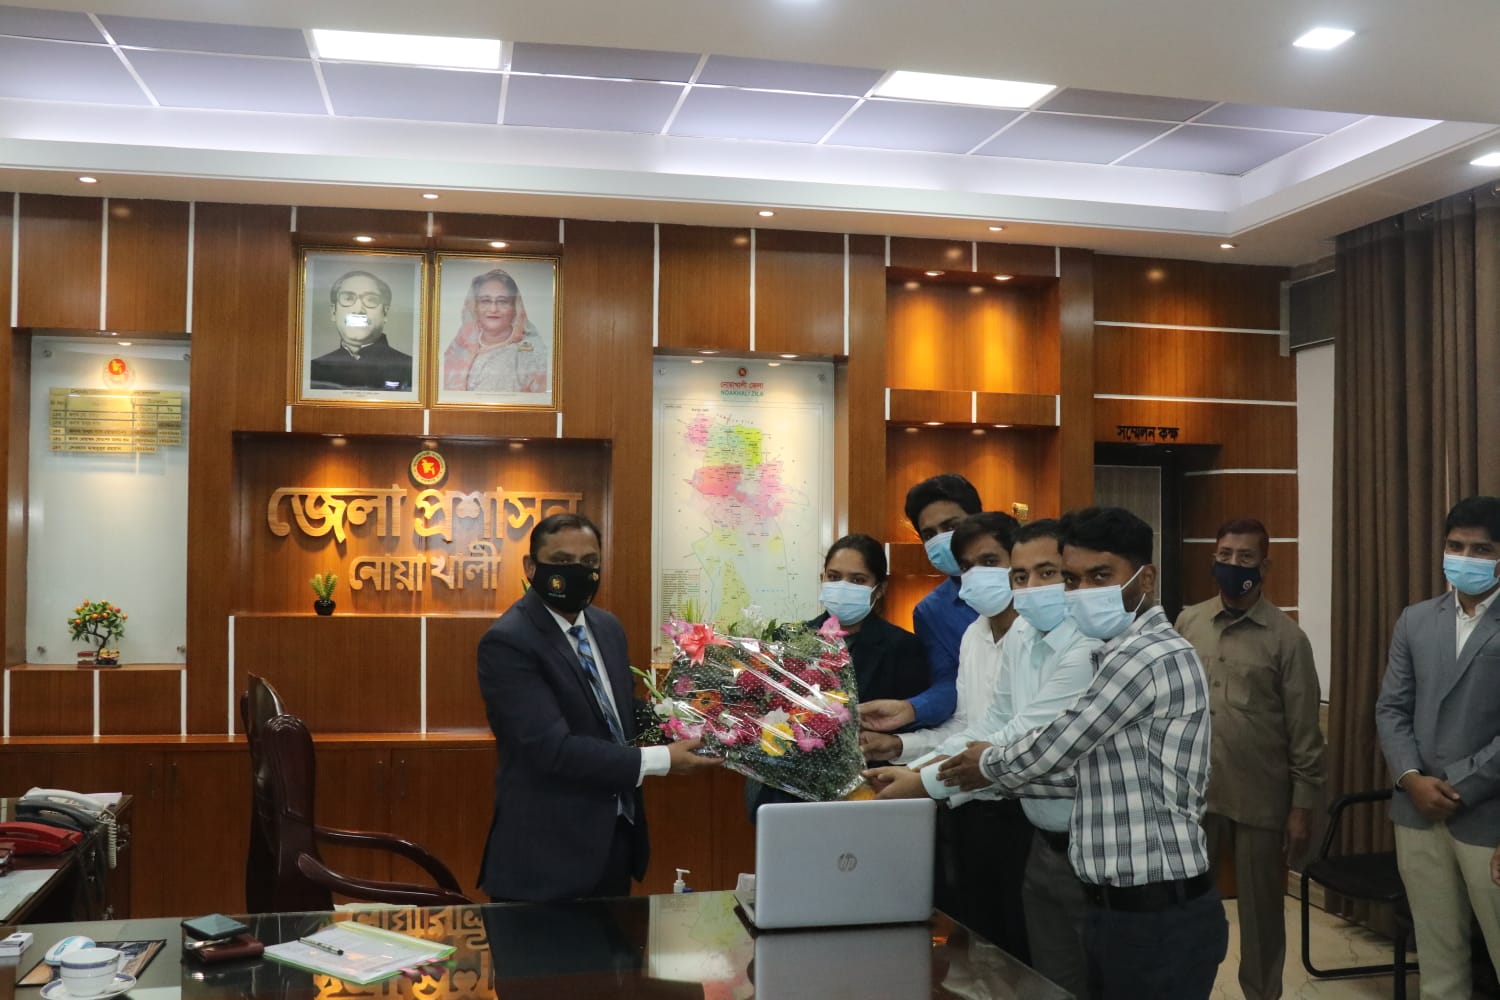 Honorable DC is being welcomed with flowers by the Zila Proshashon School and College  (English version), Noakhali Family 